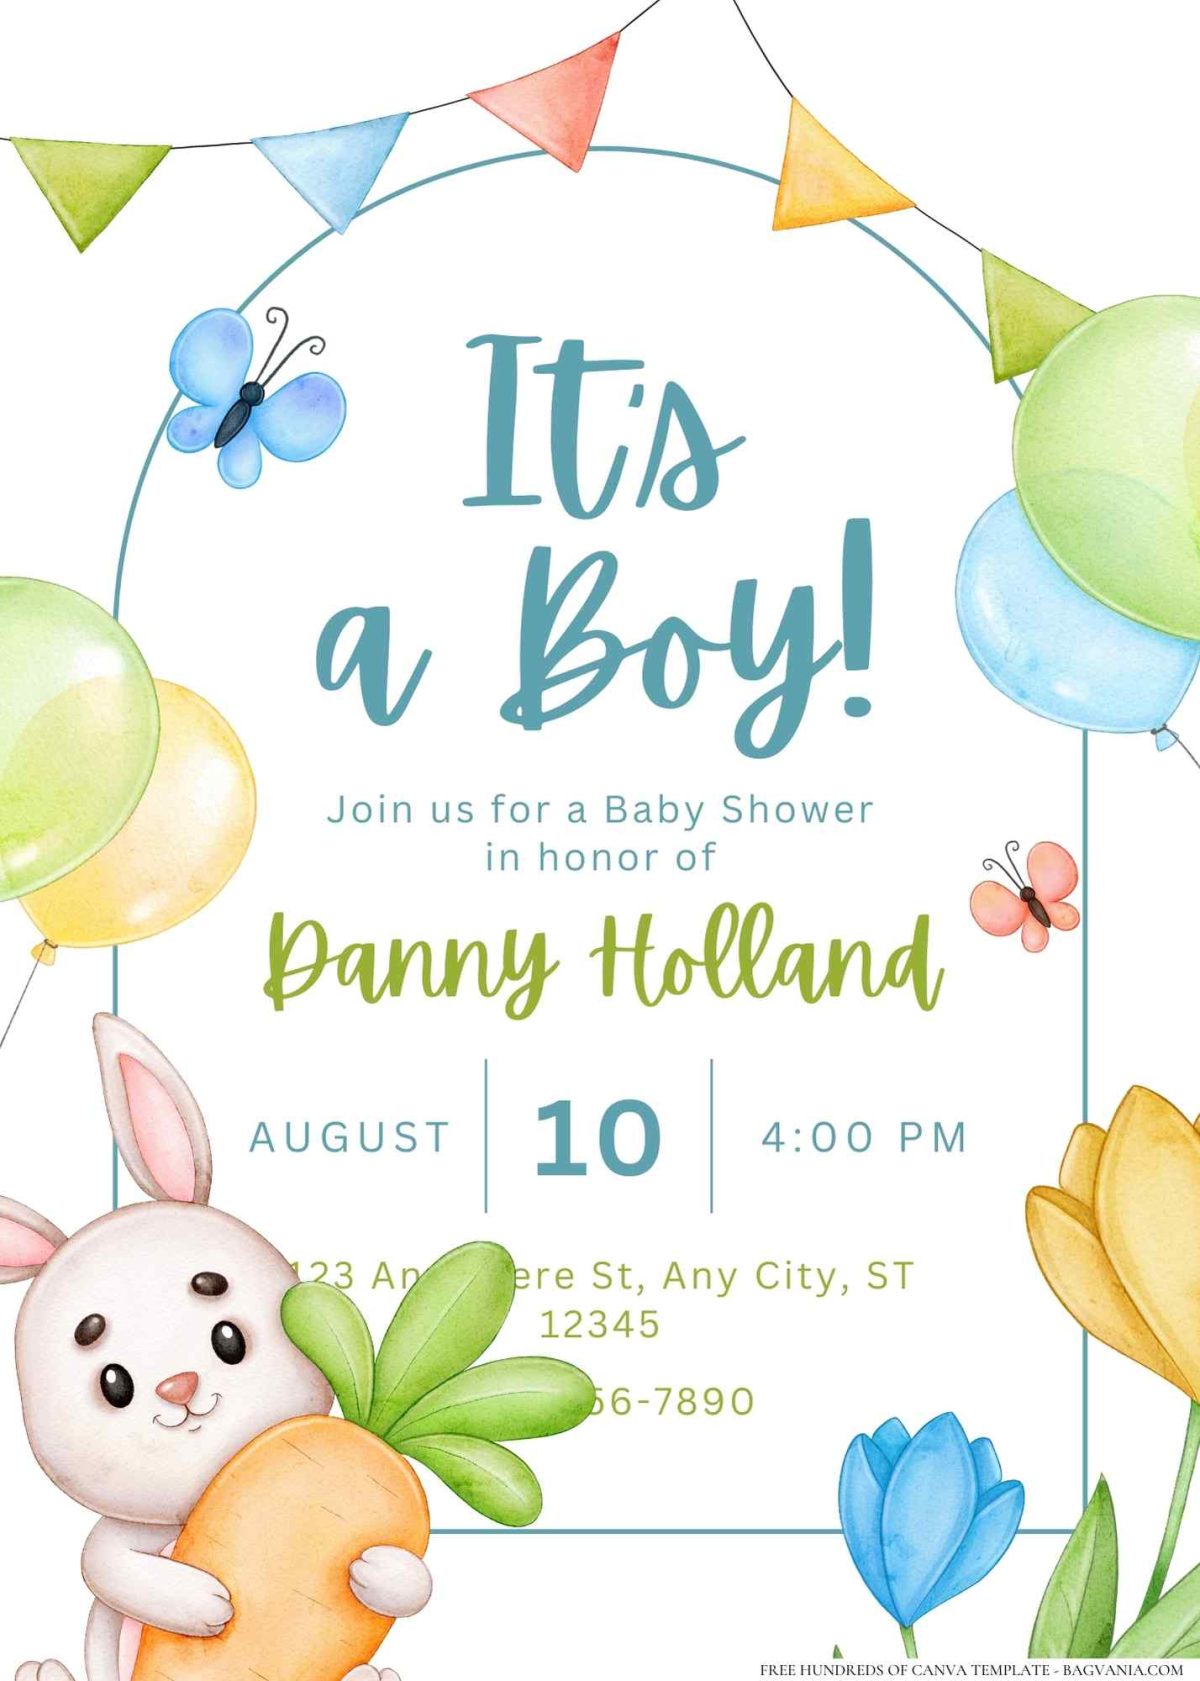 FREE Editable Cute Hare with a carrot Baby Shower Invitation